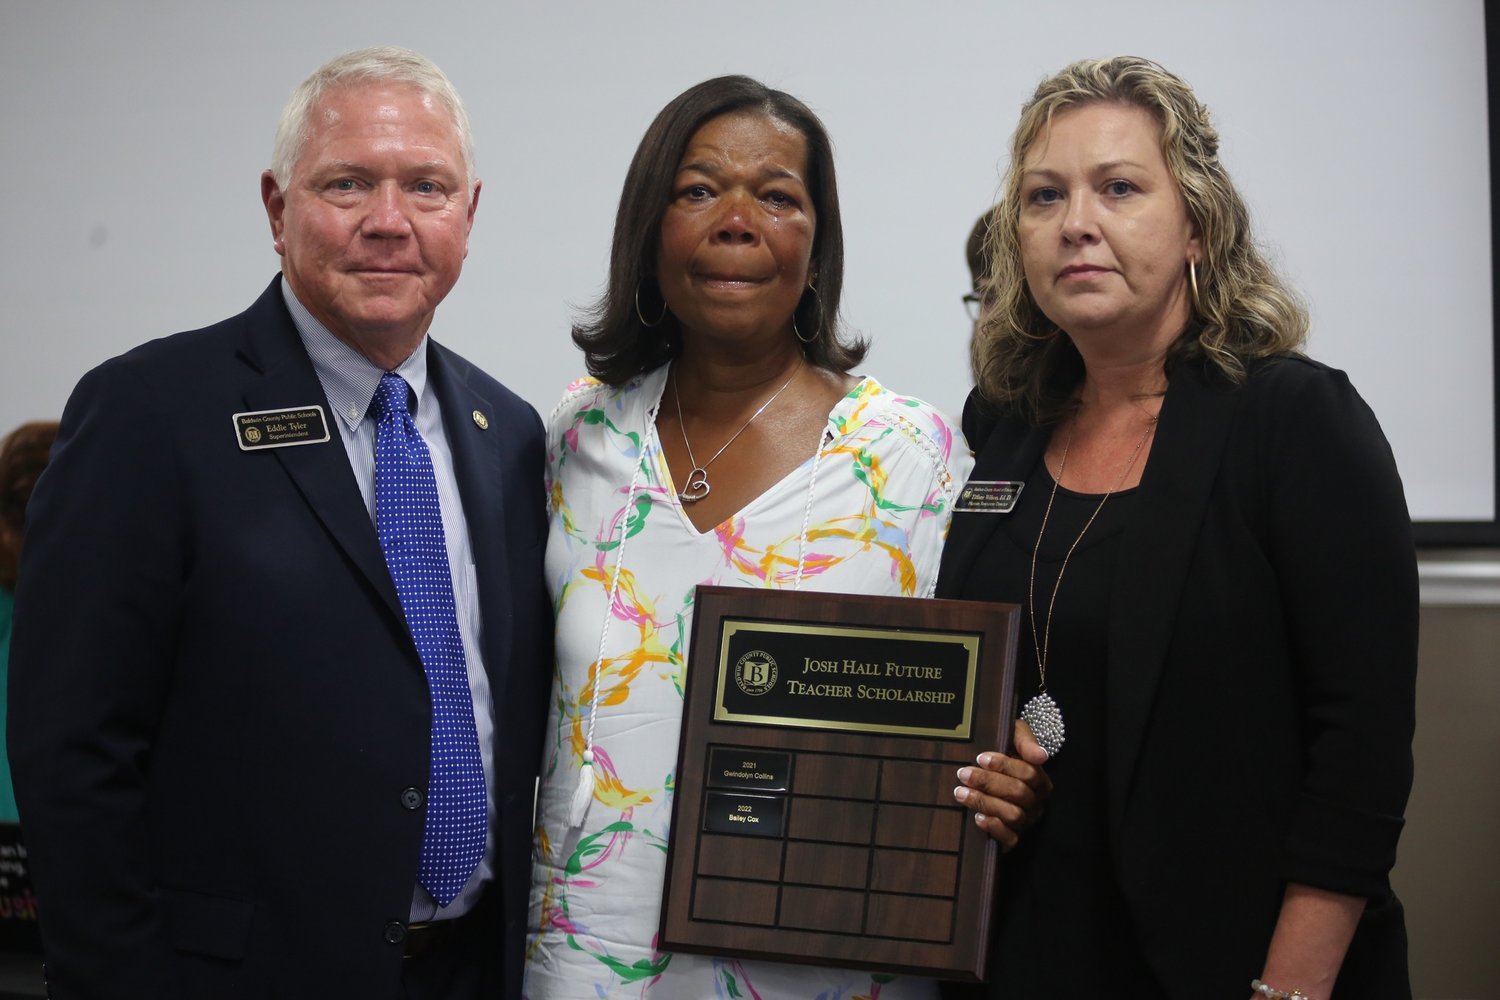 Angie Hall, center, principal at Fairhope Middle School, is presented a plaque in honor of her son Josh by BCBE Superintendent Eddie Tyler and BCBE HR Director Tiffany Wilson. The plaque will be placed in Fairhope Middle School. Each year, the names of the recipients of the Josh Hall Memorial Scholarship will be added.